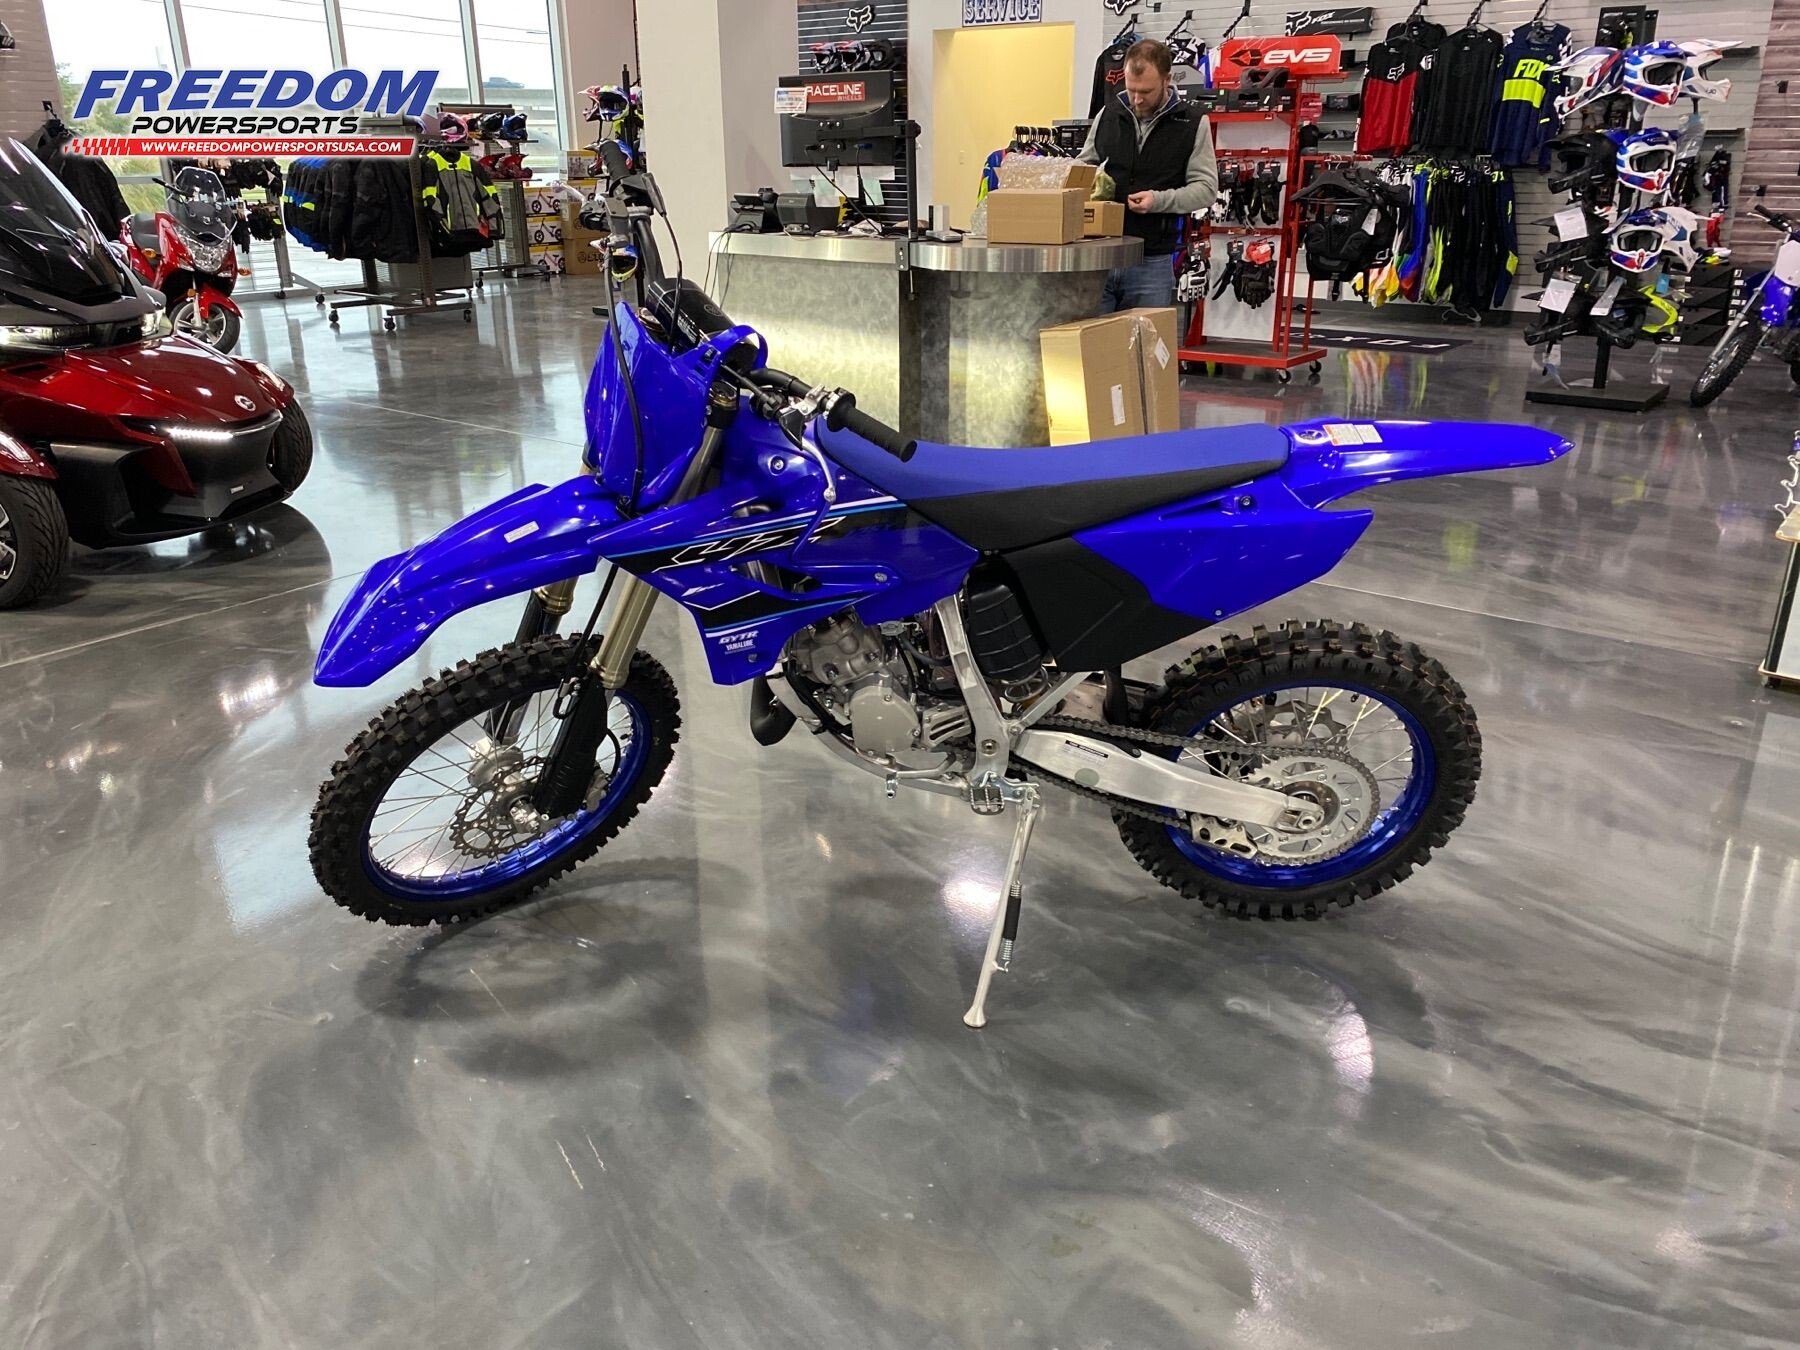 2018 yz125 for sale